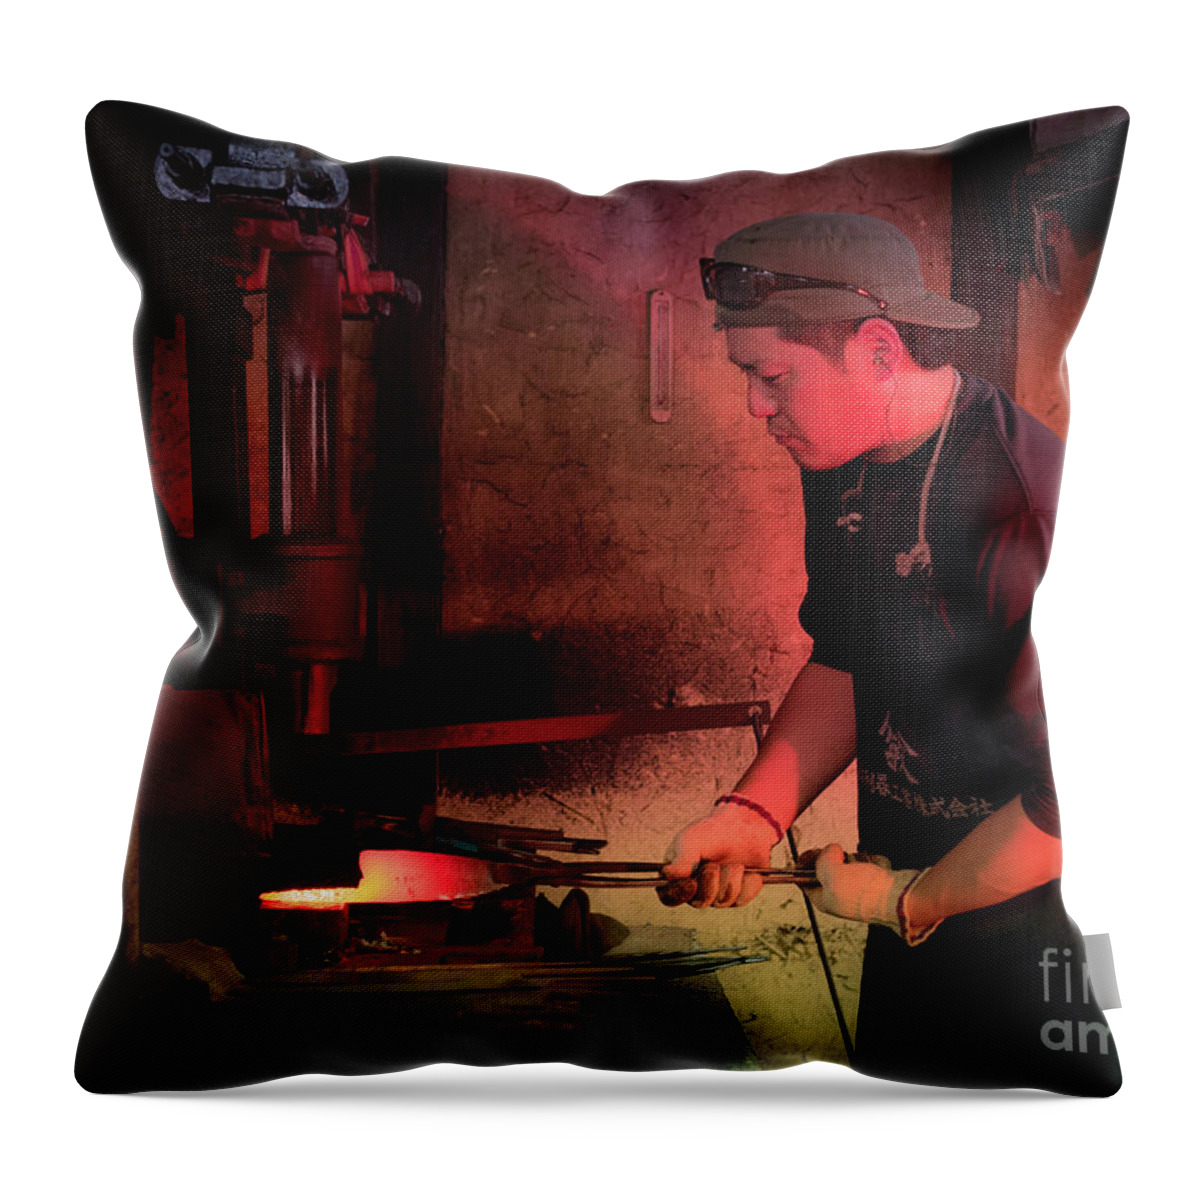 Blacksmith Throw Pillow featuring the photograph 4th Generation Blacksmith, Miki City Japan by Perry Rodriguez